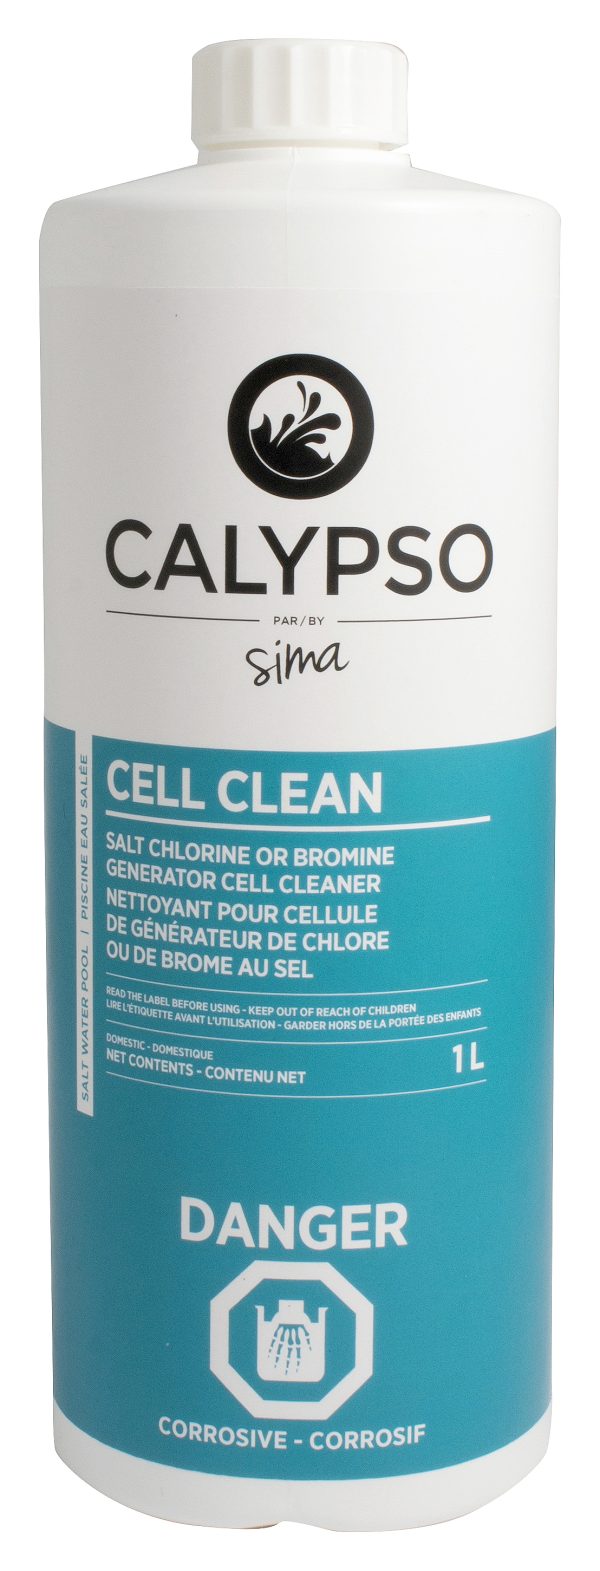 Calypso Cell Clean 1L - pool products - Pool maintenance - Sima POOLS & SPAS